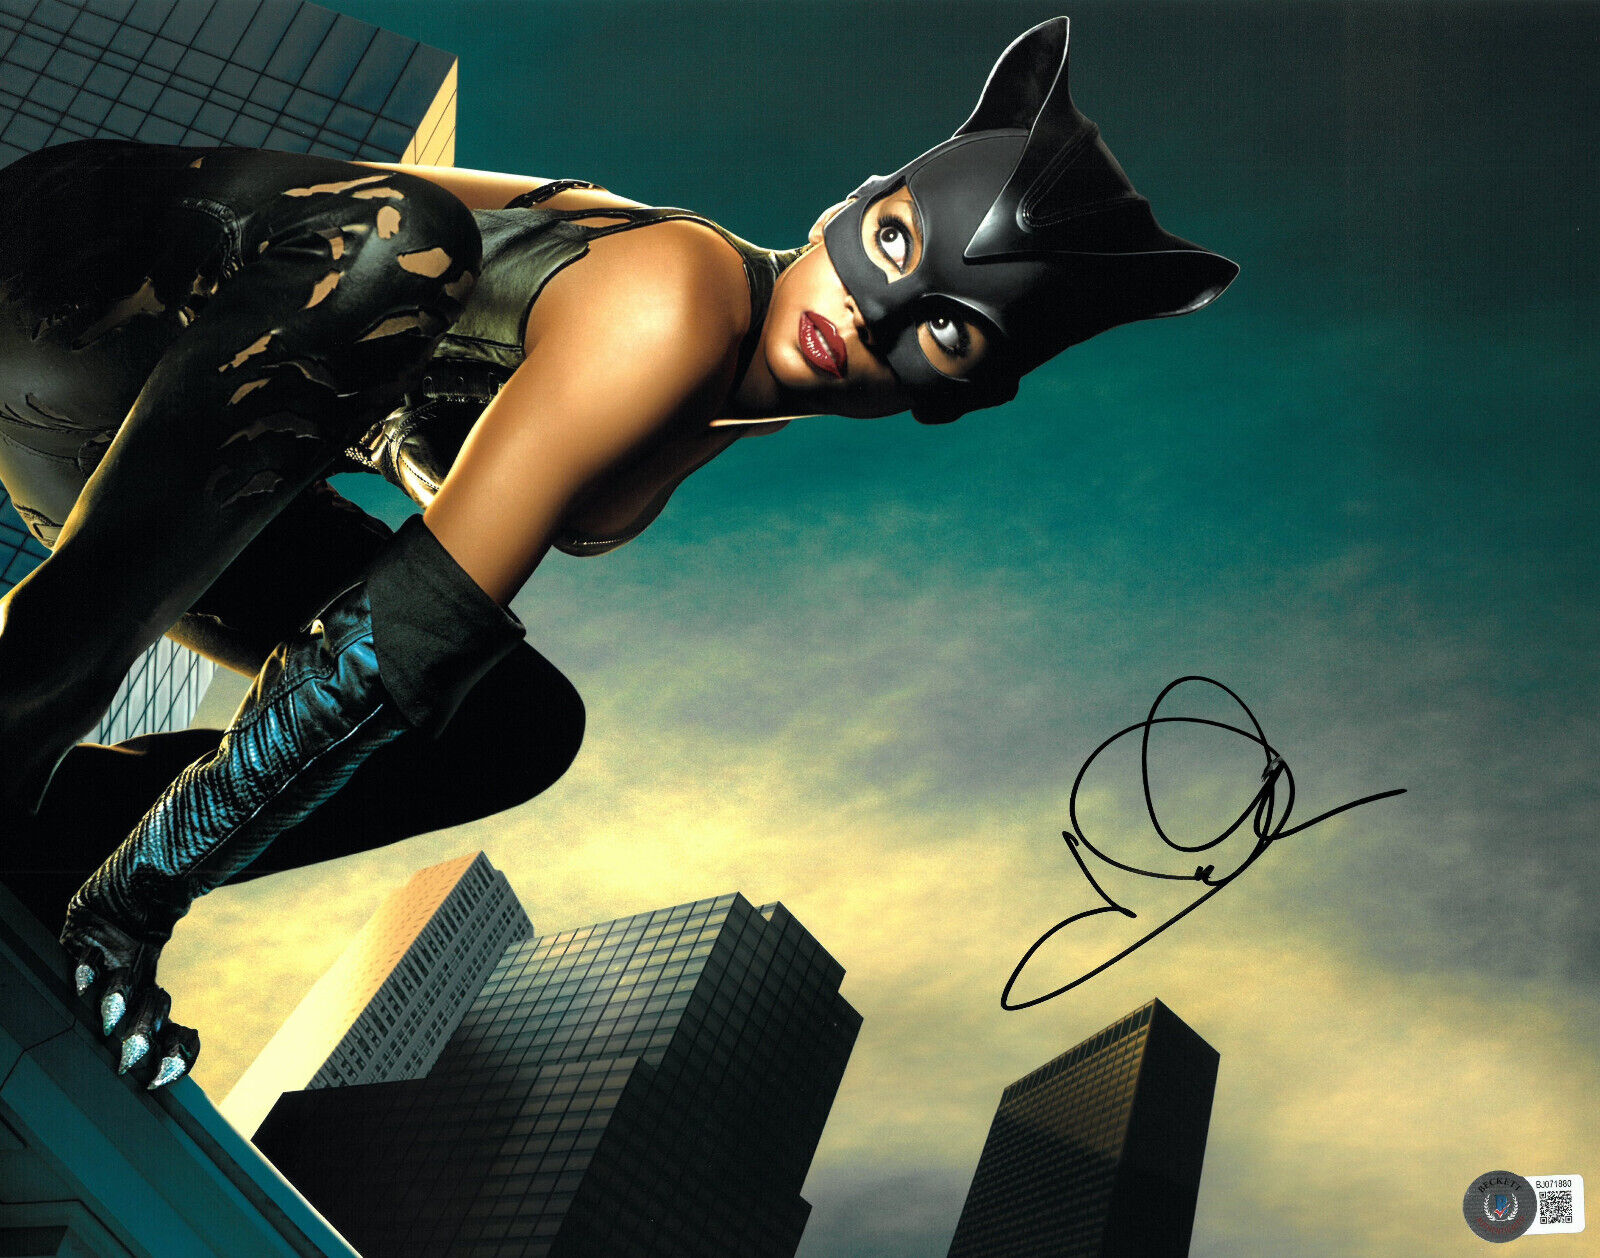 HALLE BERY SIGNED AUTOGRAPH CATWOMAN 11X14 PHOTO BECKETT BAS